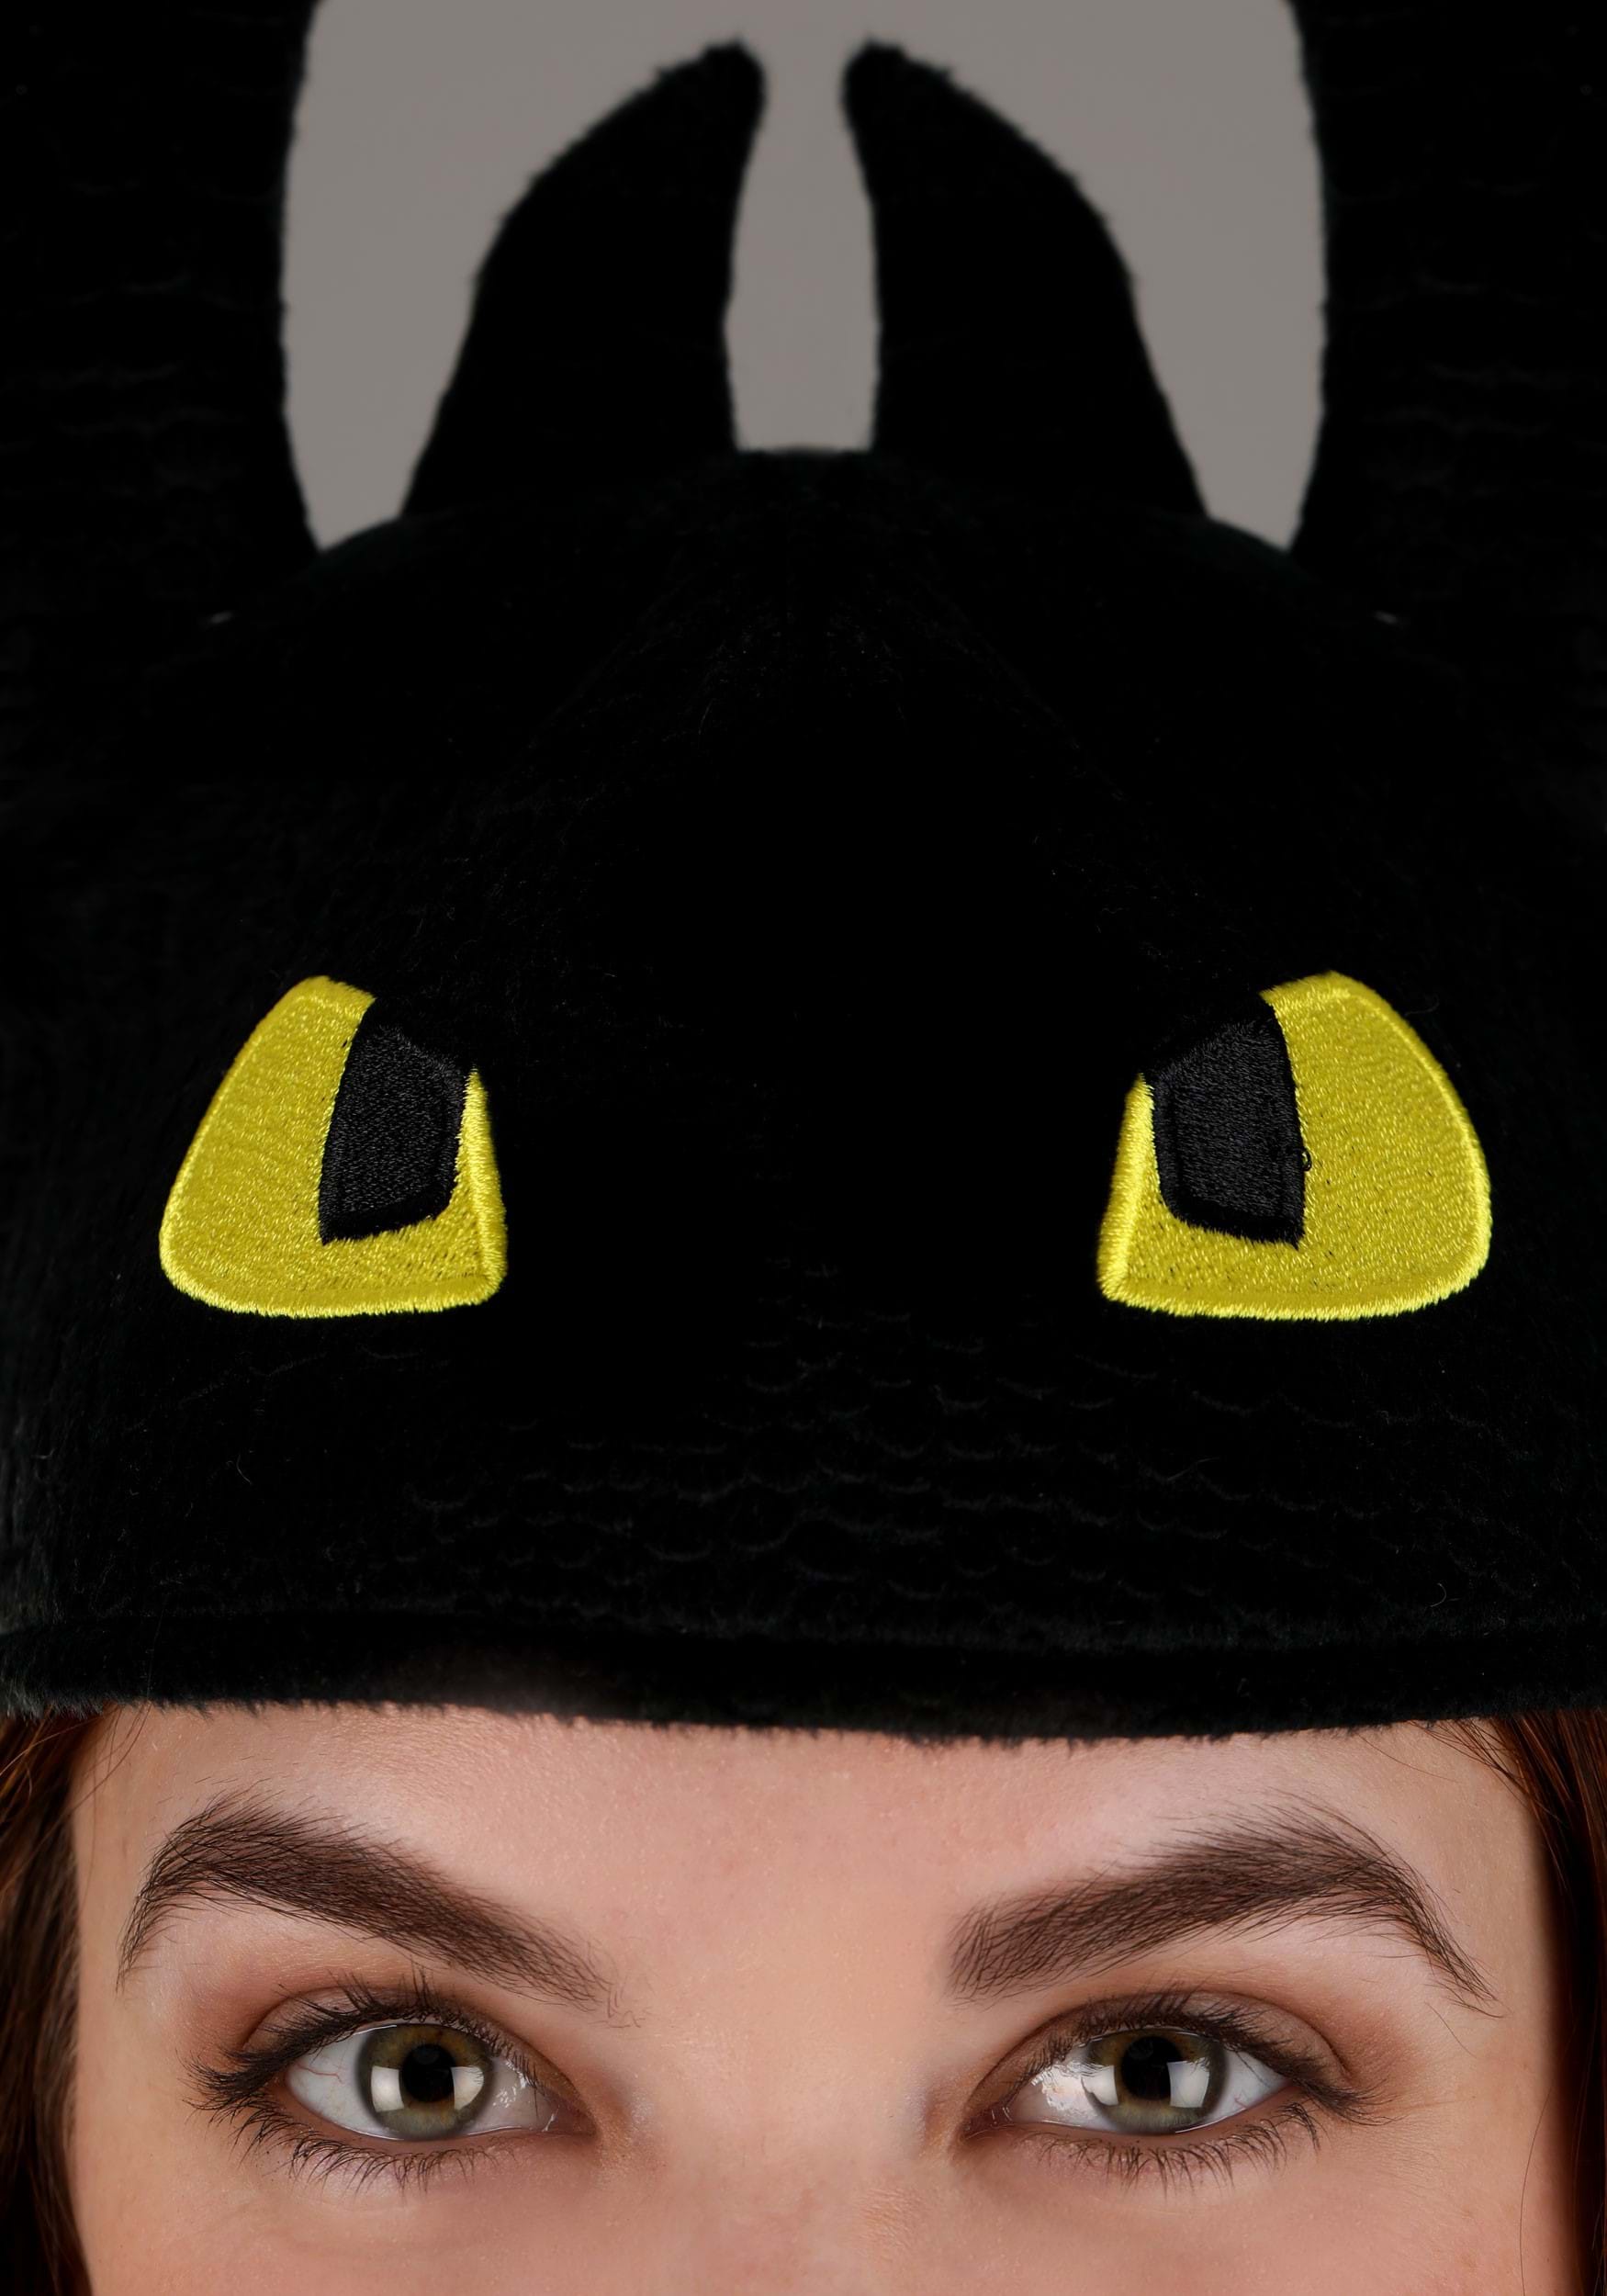 How To Train Your Dragon Toothless Costume Accessory Kit